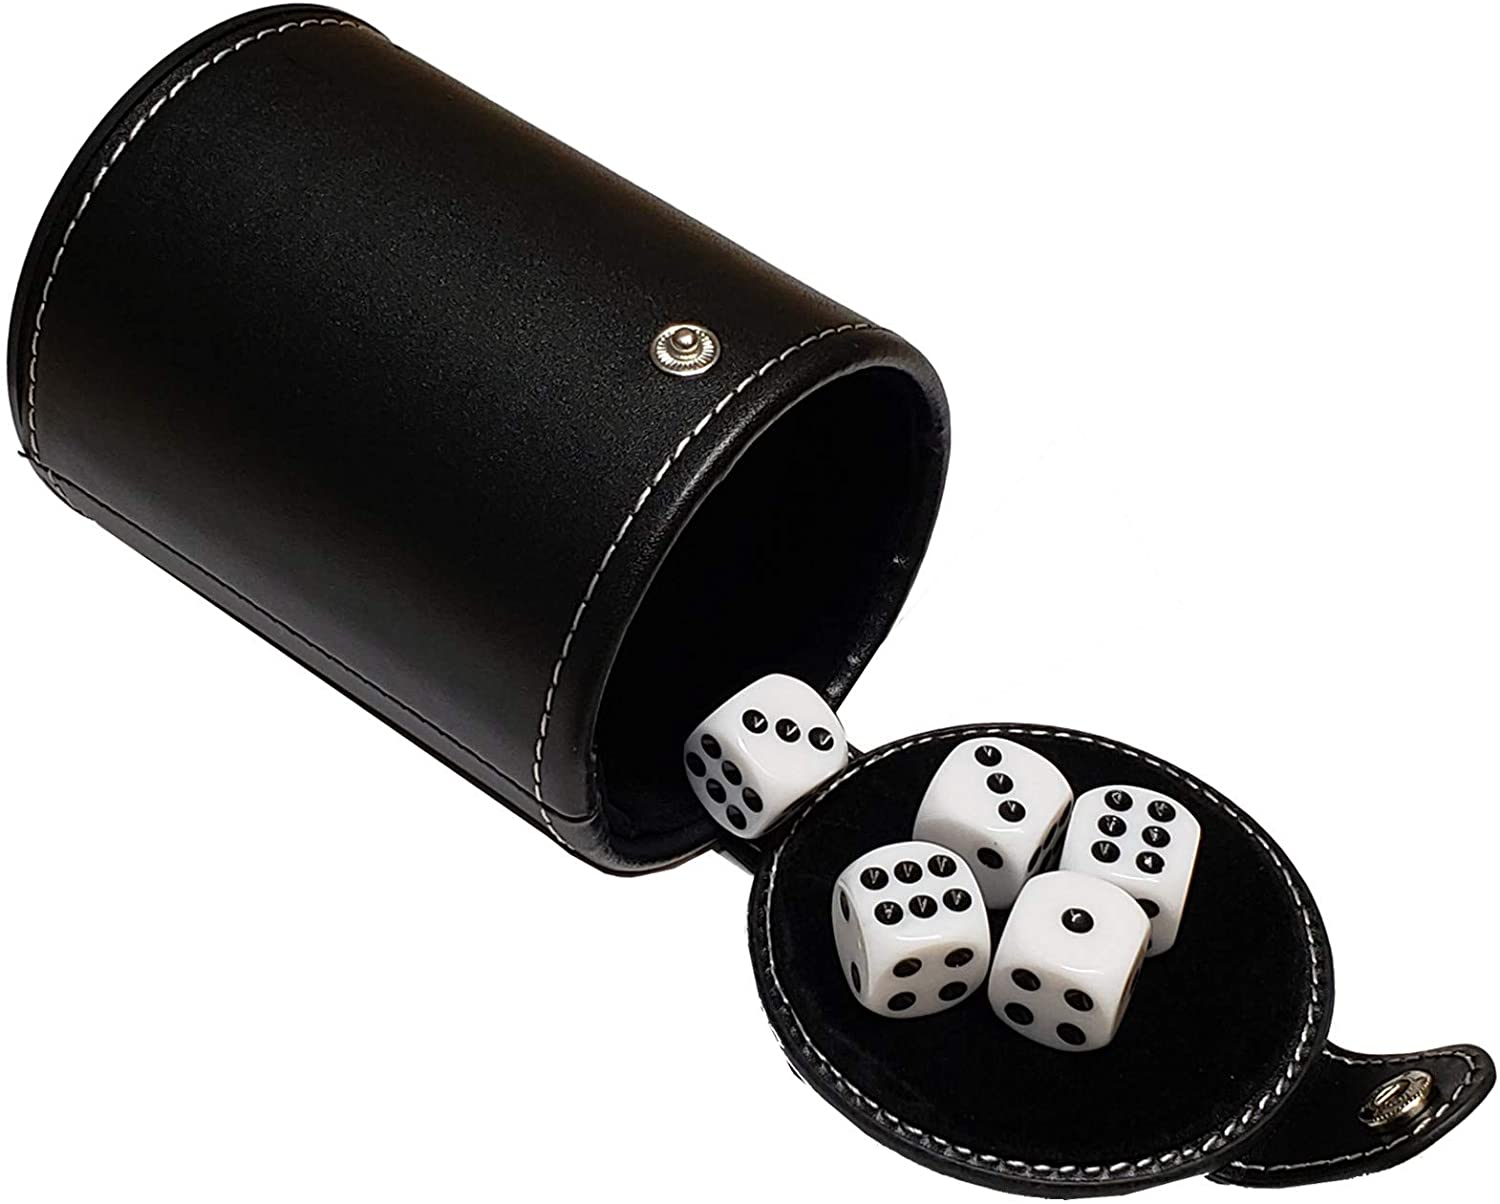 Set of 16mm Poker Dice and Black PU Leather Red Felt Lined Dice Cup with Storage Compartment Gift Boxed 